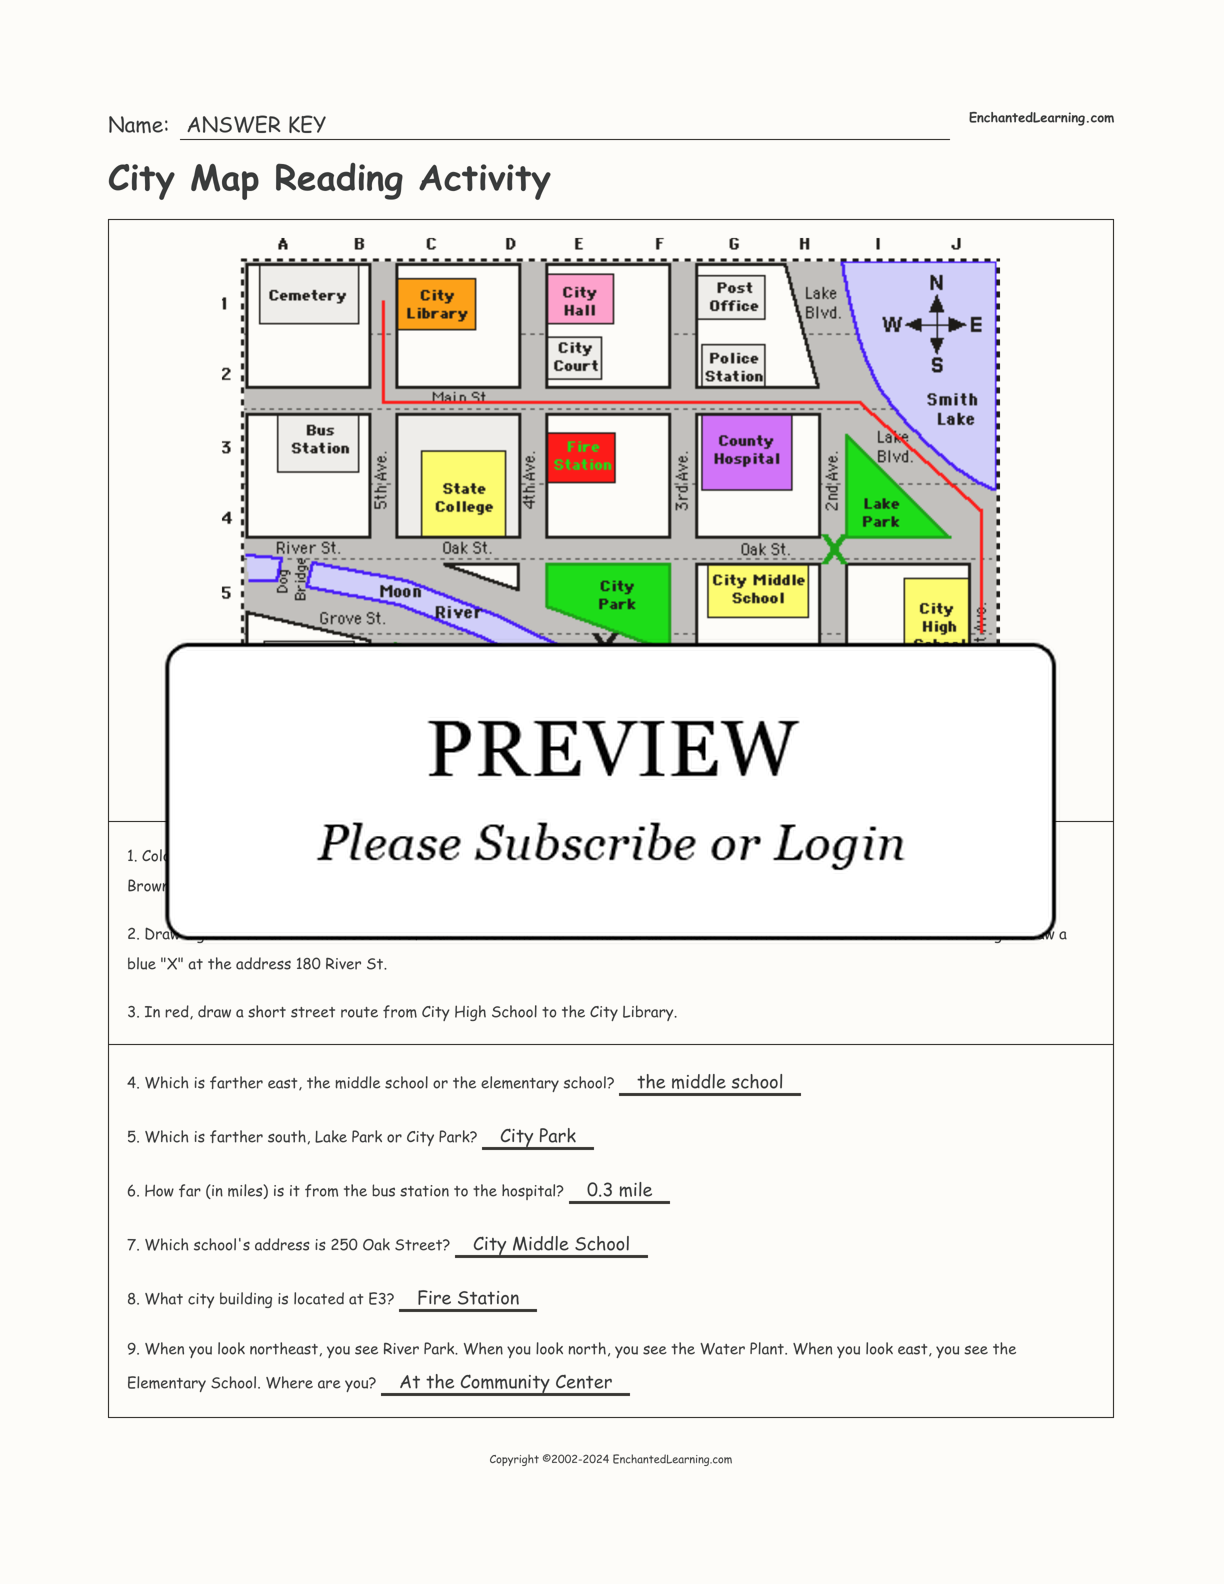 City Map Reading Activity interactive worksheet page 2